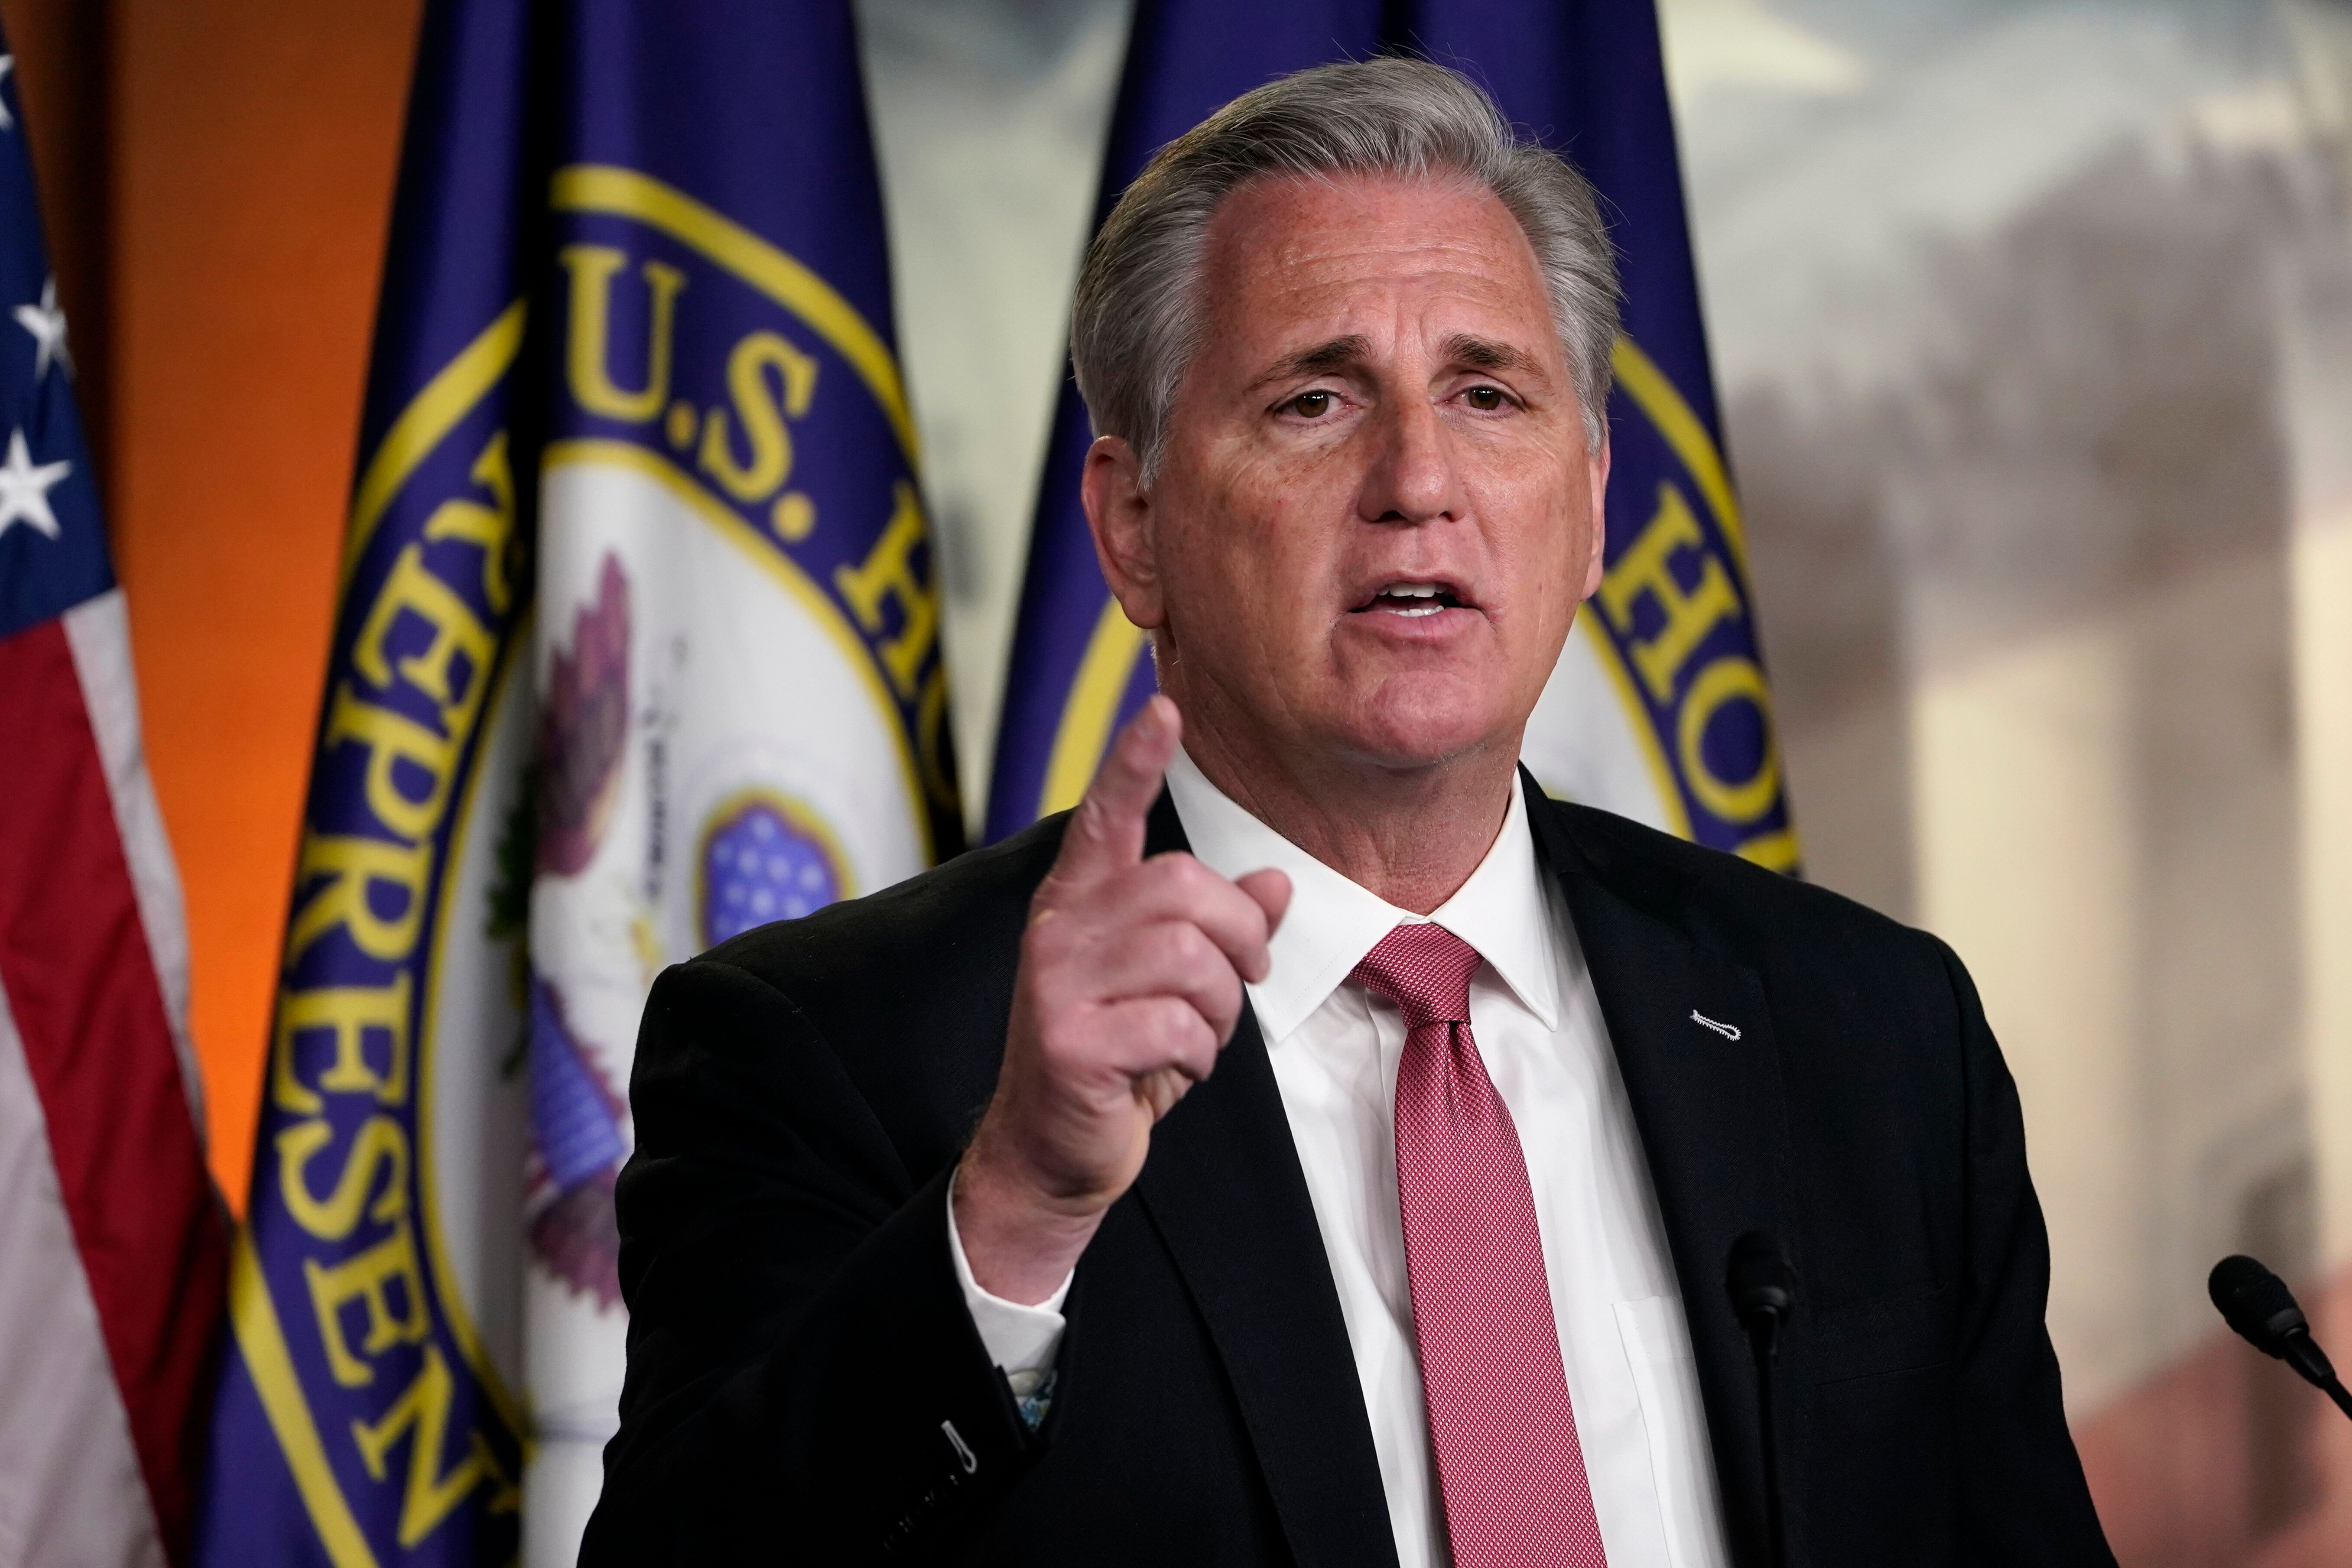 McCarthy Meets With Rep. Greene While GOP Faces Cheney Decision